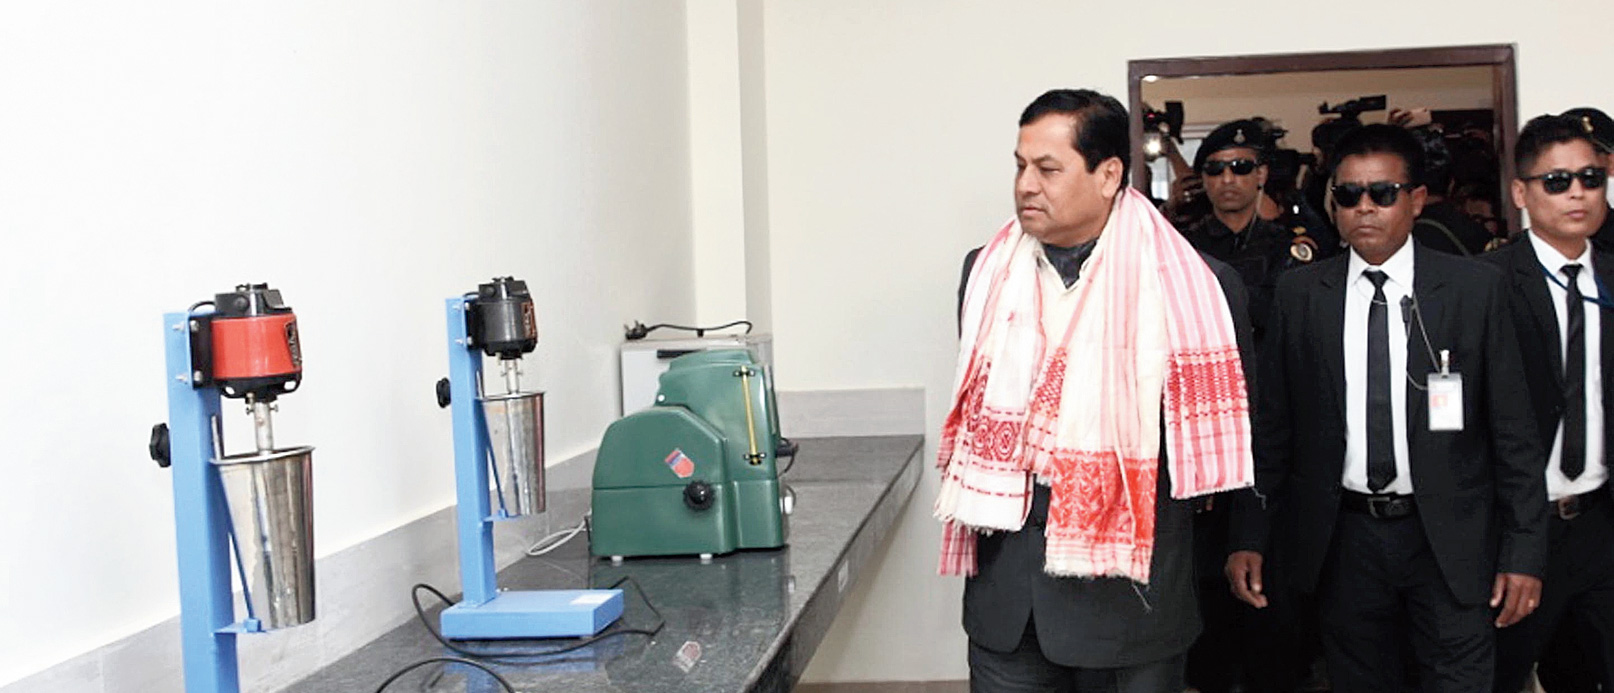 Assam chief minister Sarbananda Sonowal visits the laboratory at the college on Tuesday.